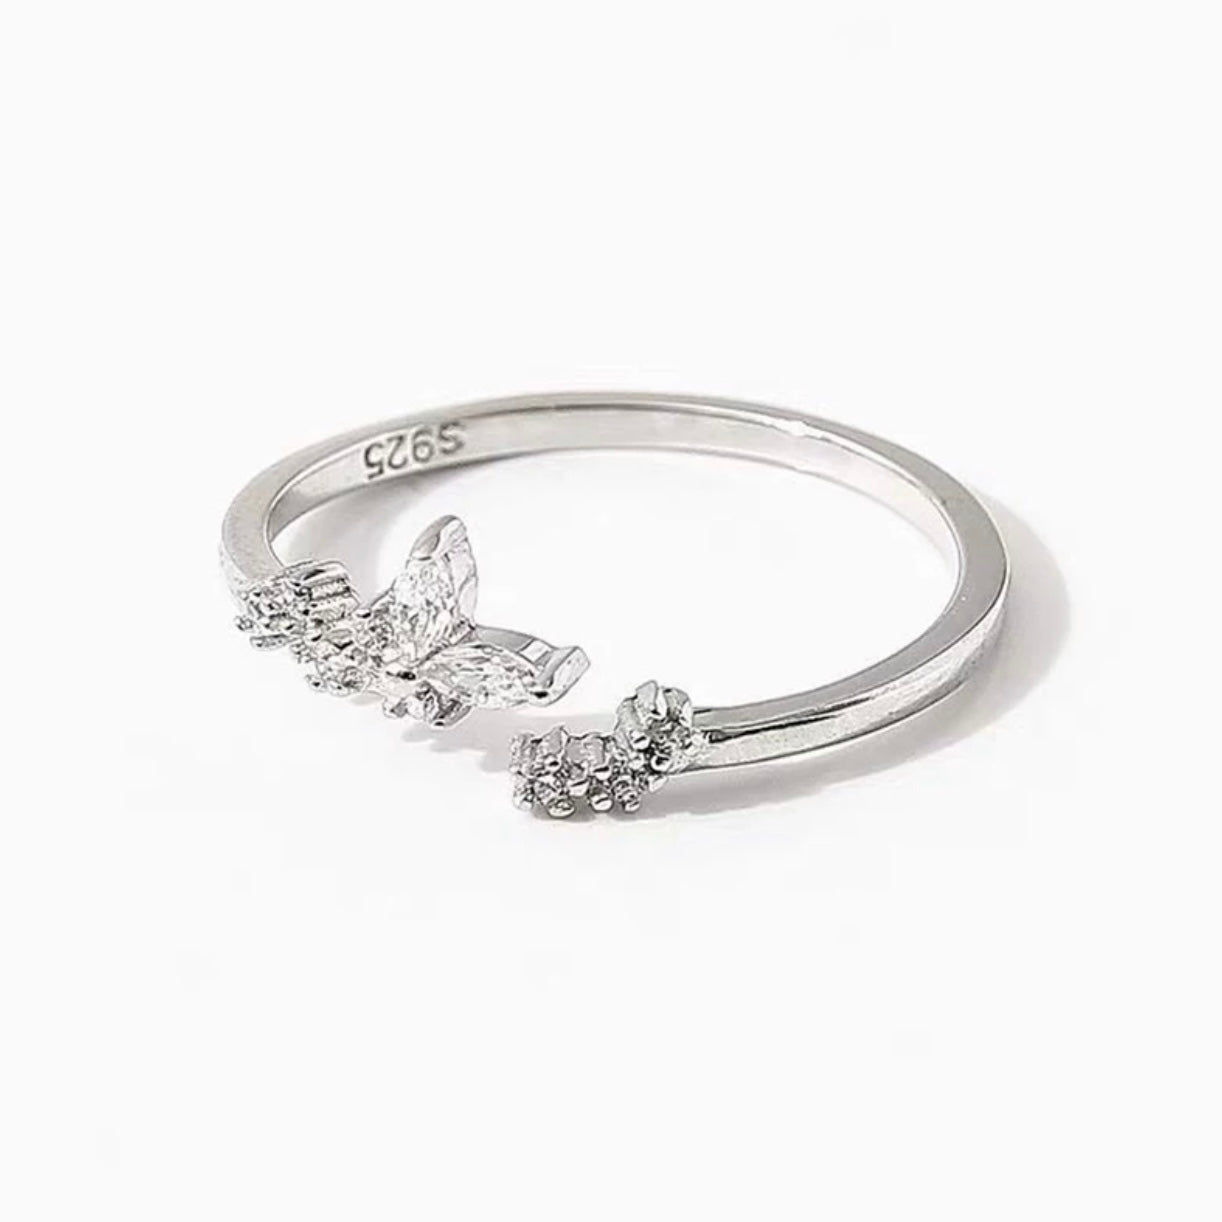 CATERNIA DAINTY BUTTERFLY STERLING SILVER  RING